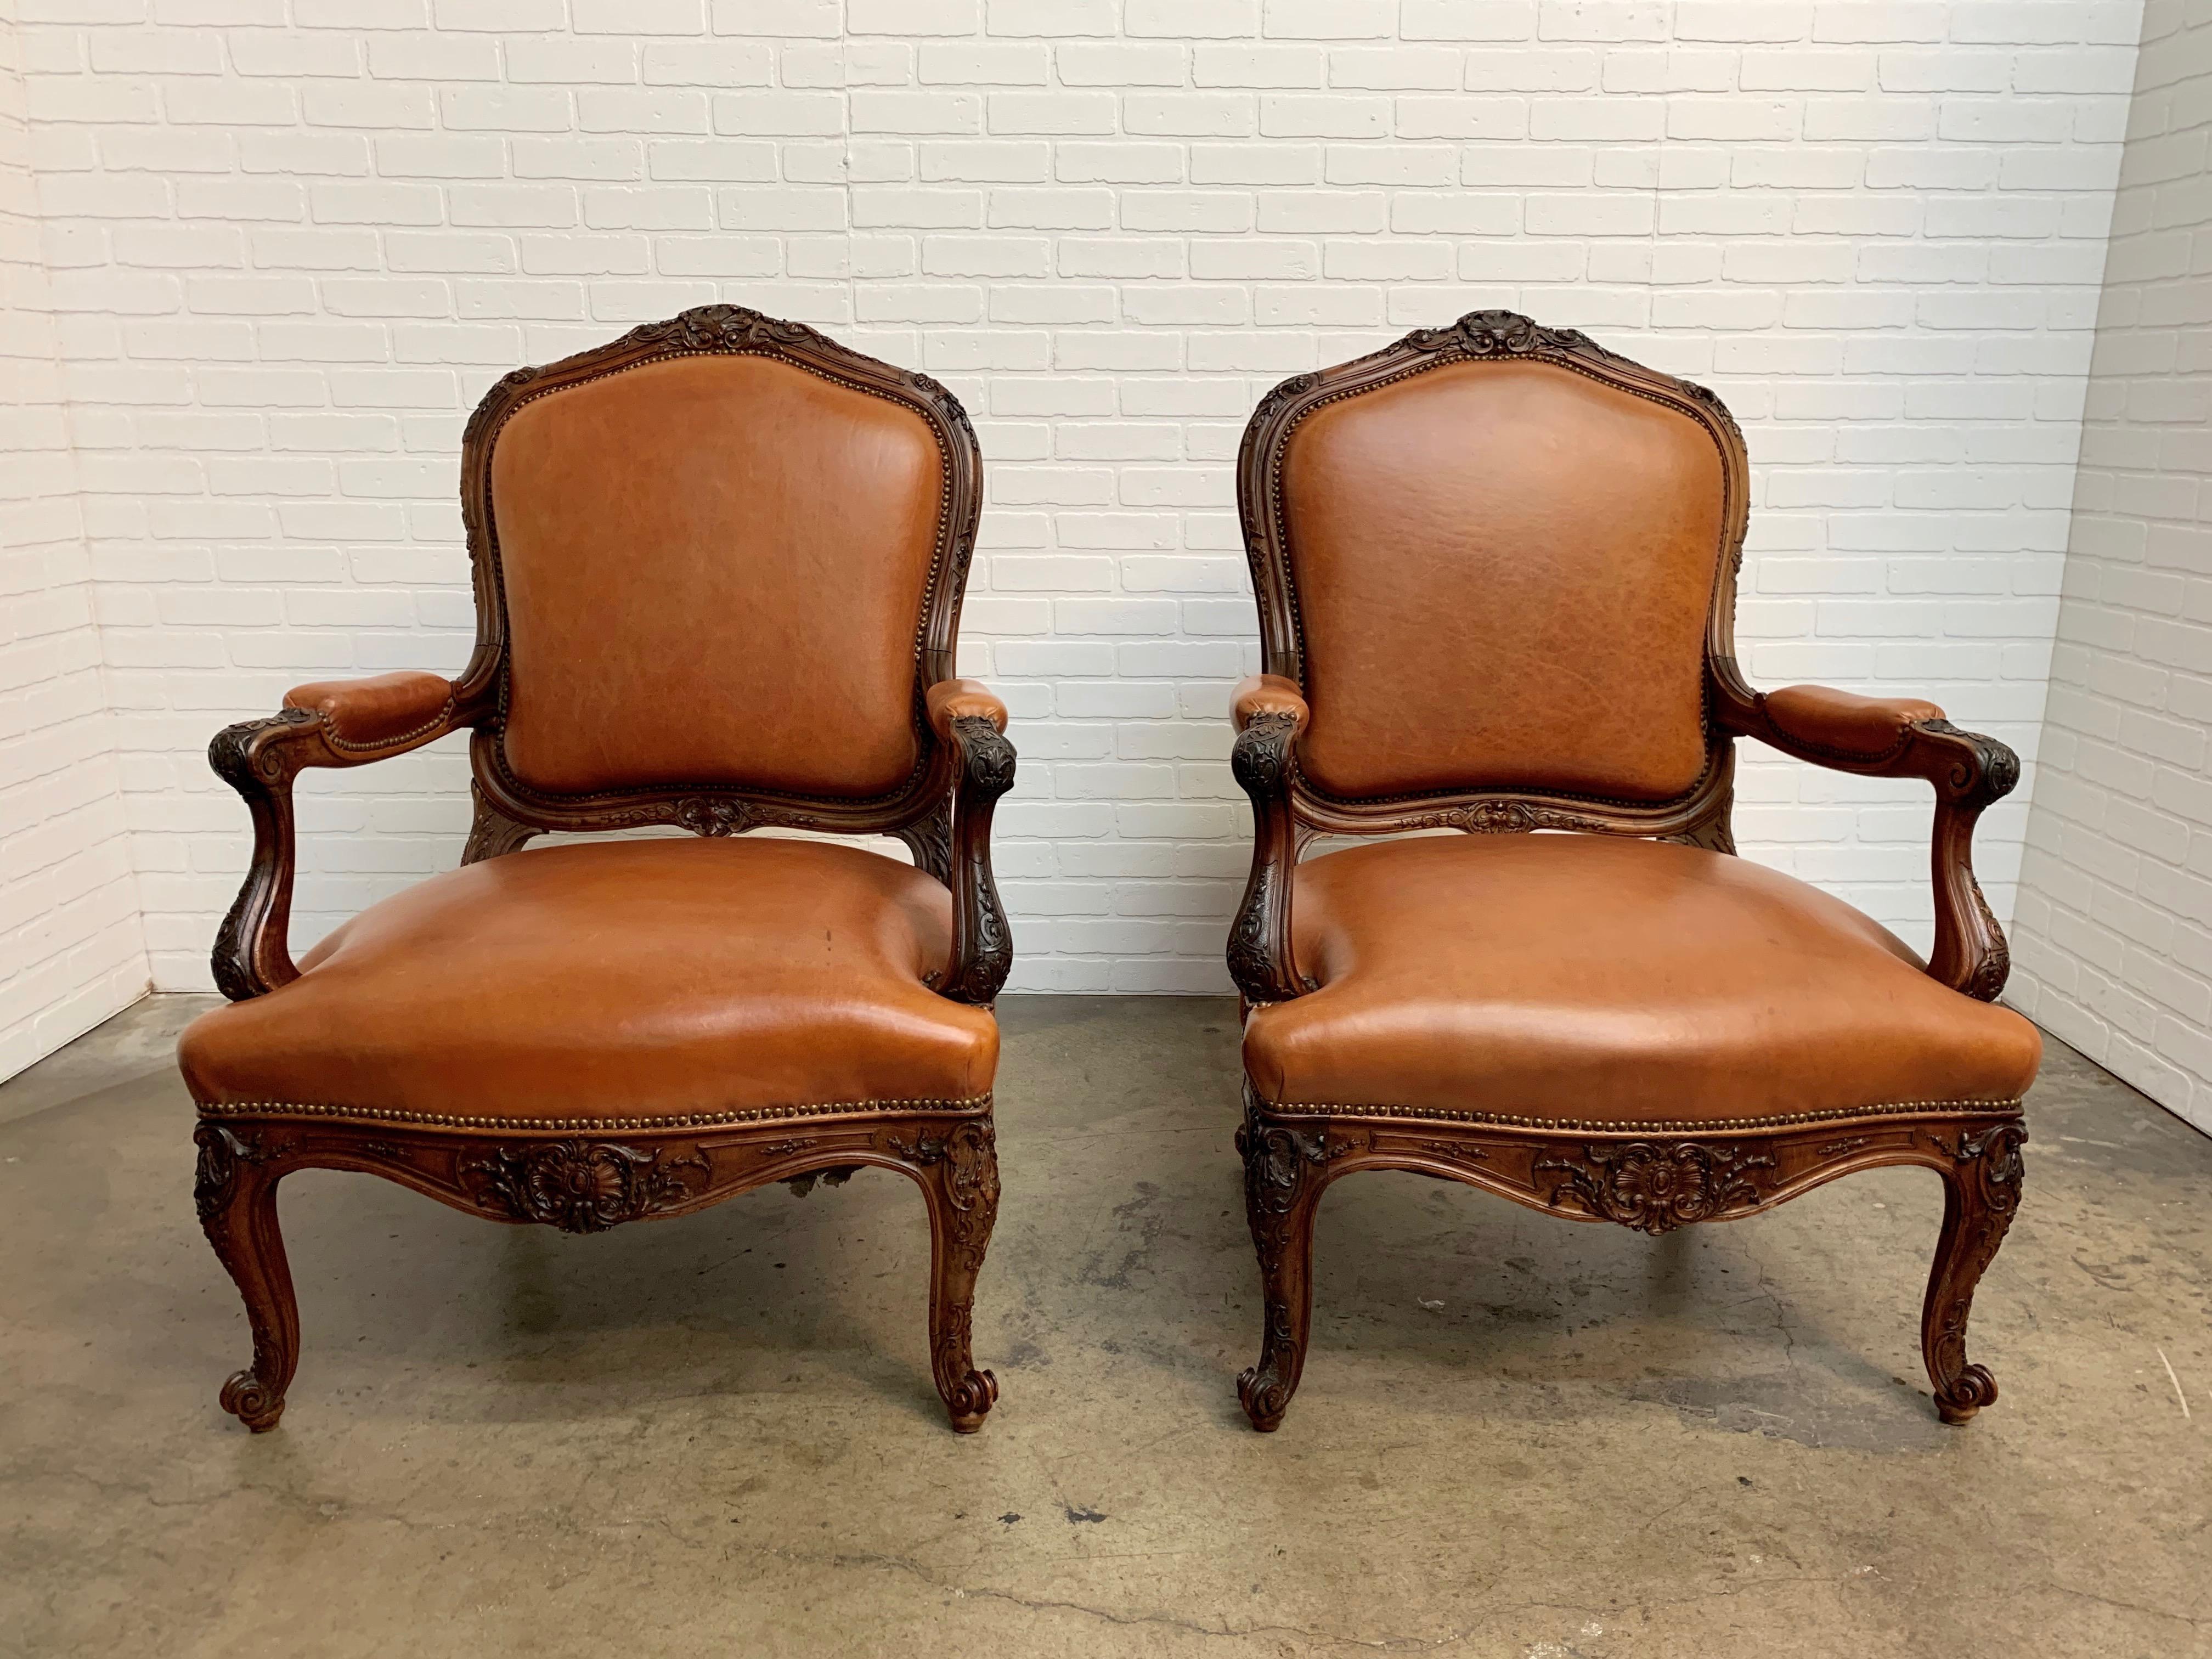 Pair of antique Louis XV style solid walnut throne lounge chairs with leather upholstery and brass nailheads.